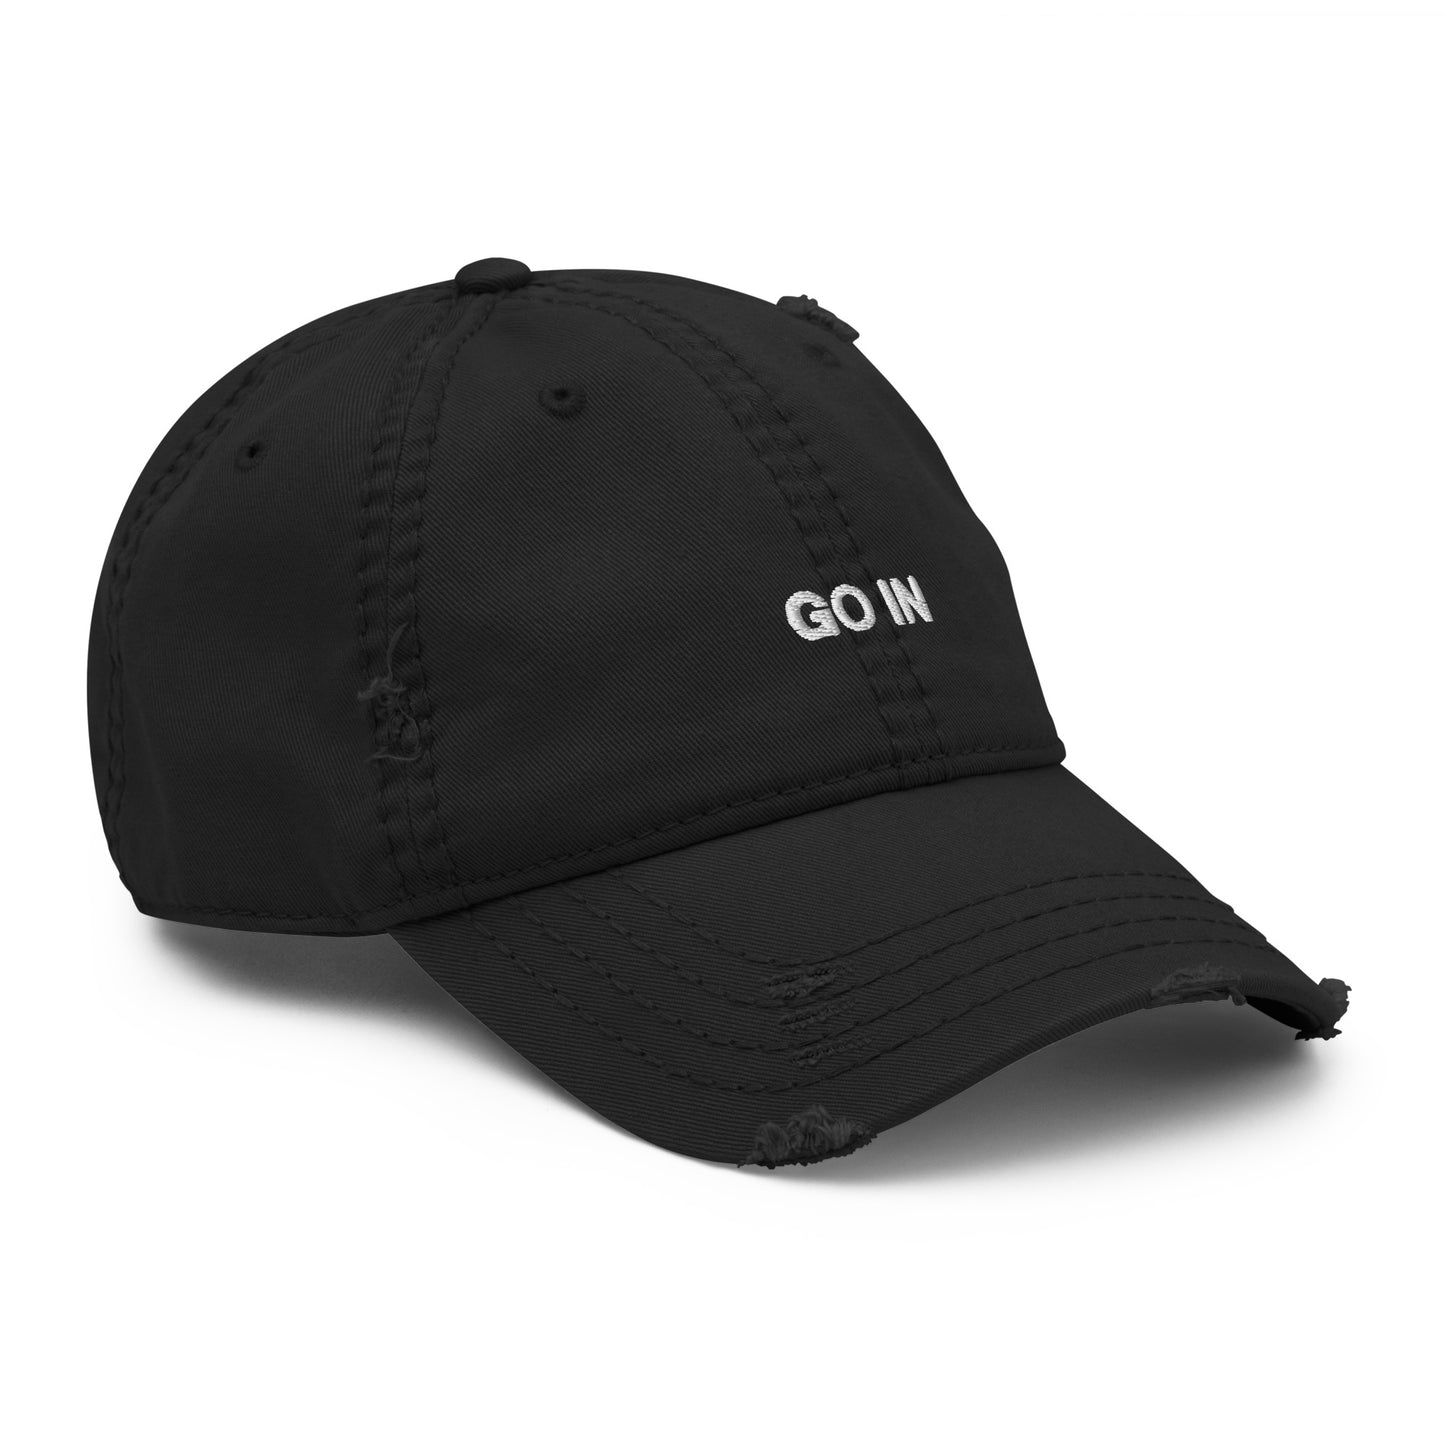 GO IN - Disc Golf Hat